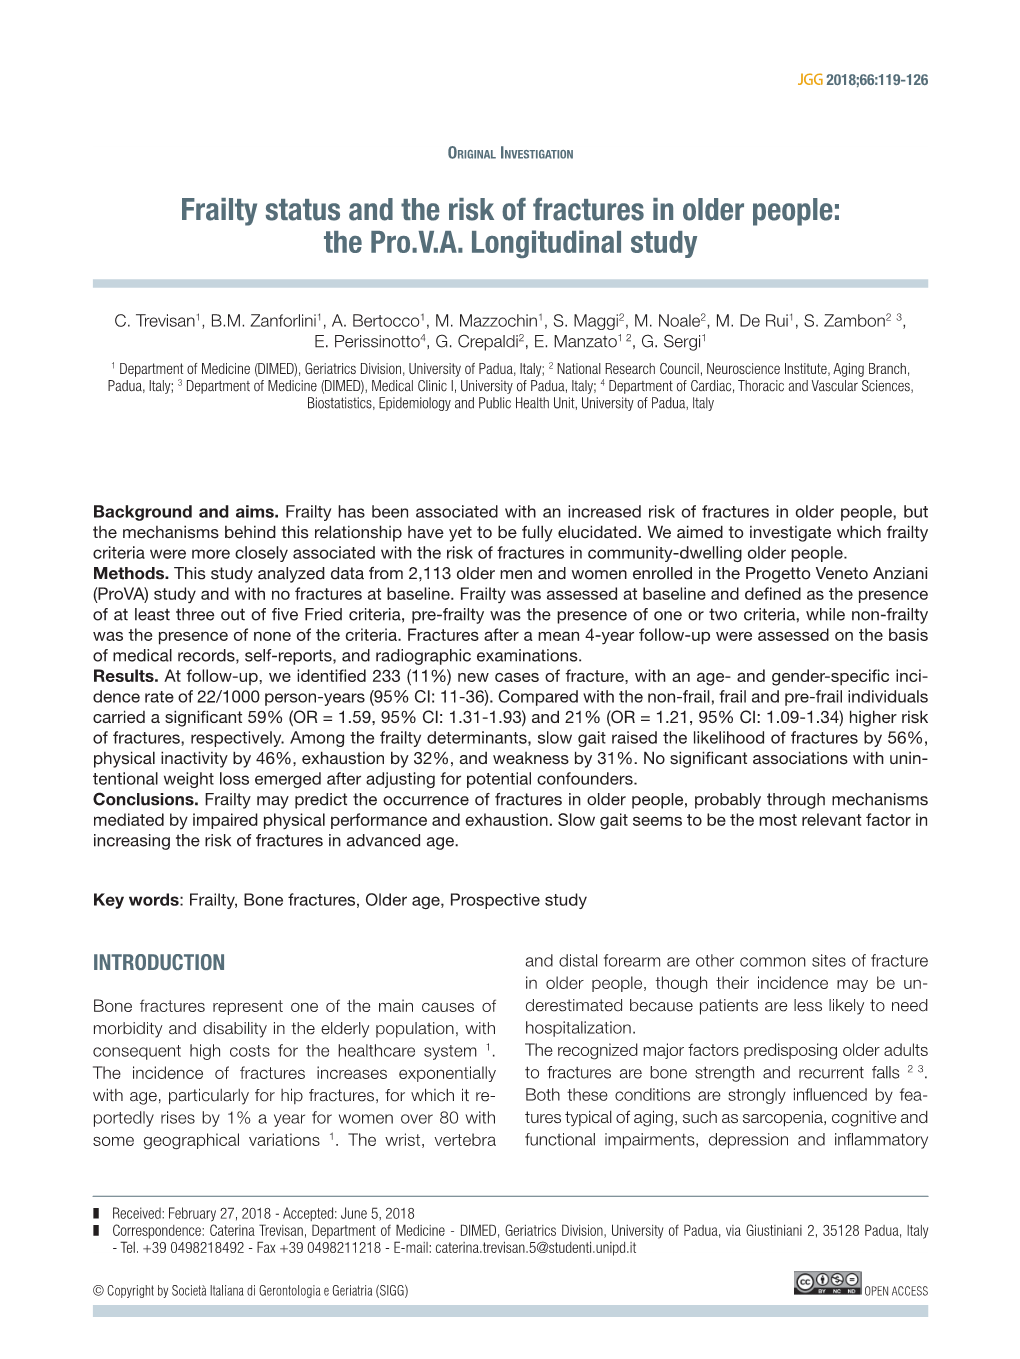 Frailty Status and the Risk of Fractures in Older People: the Pro.V.A